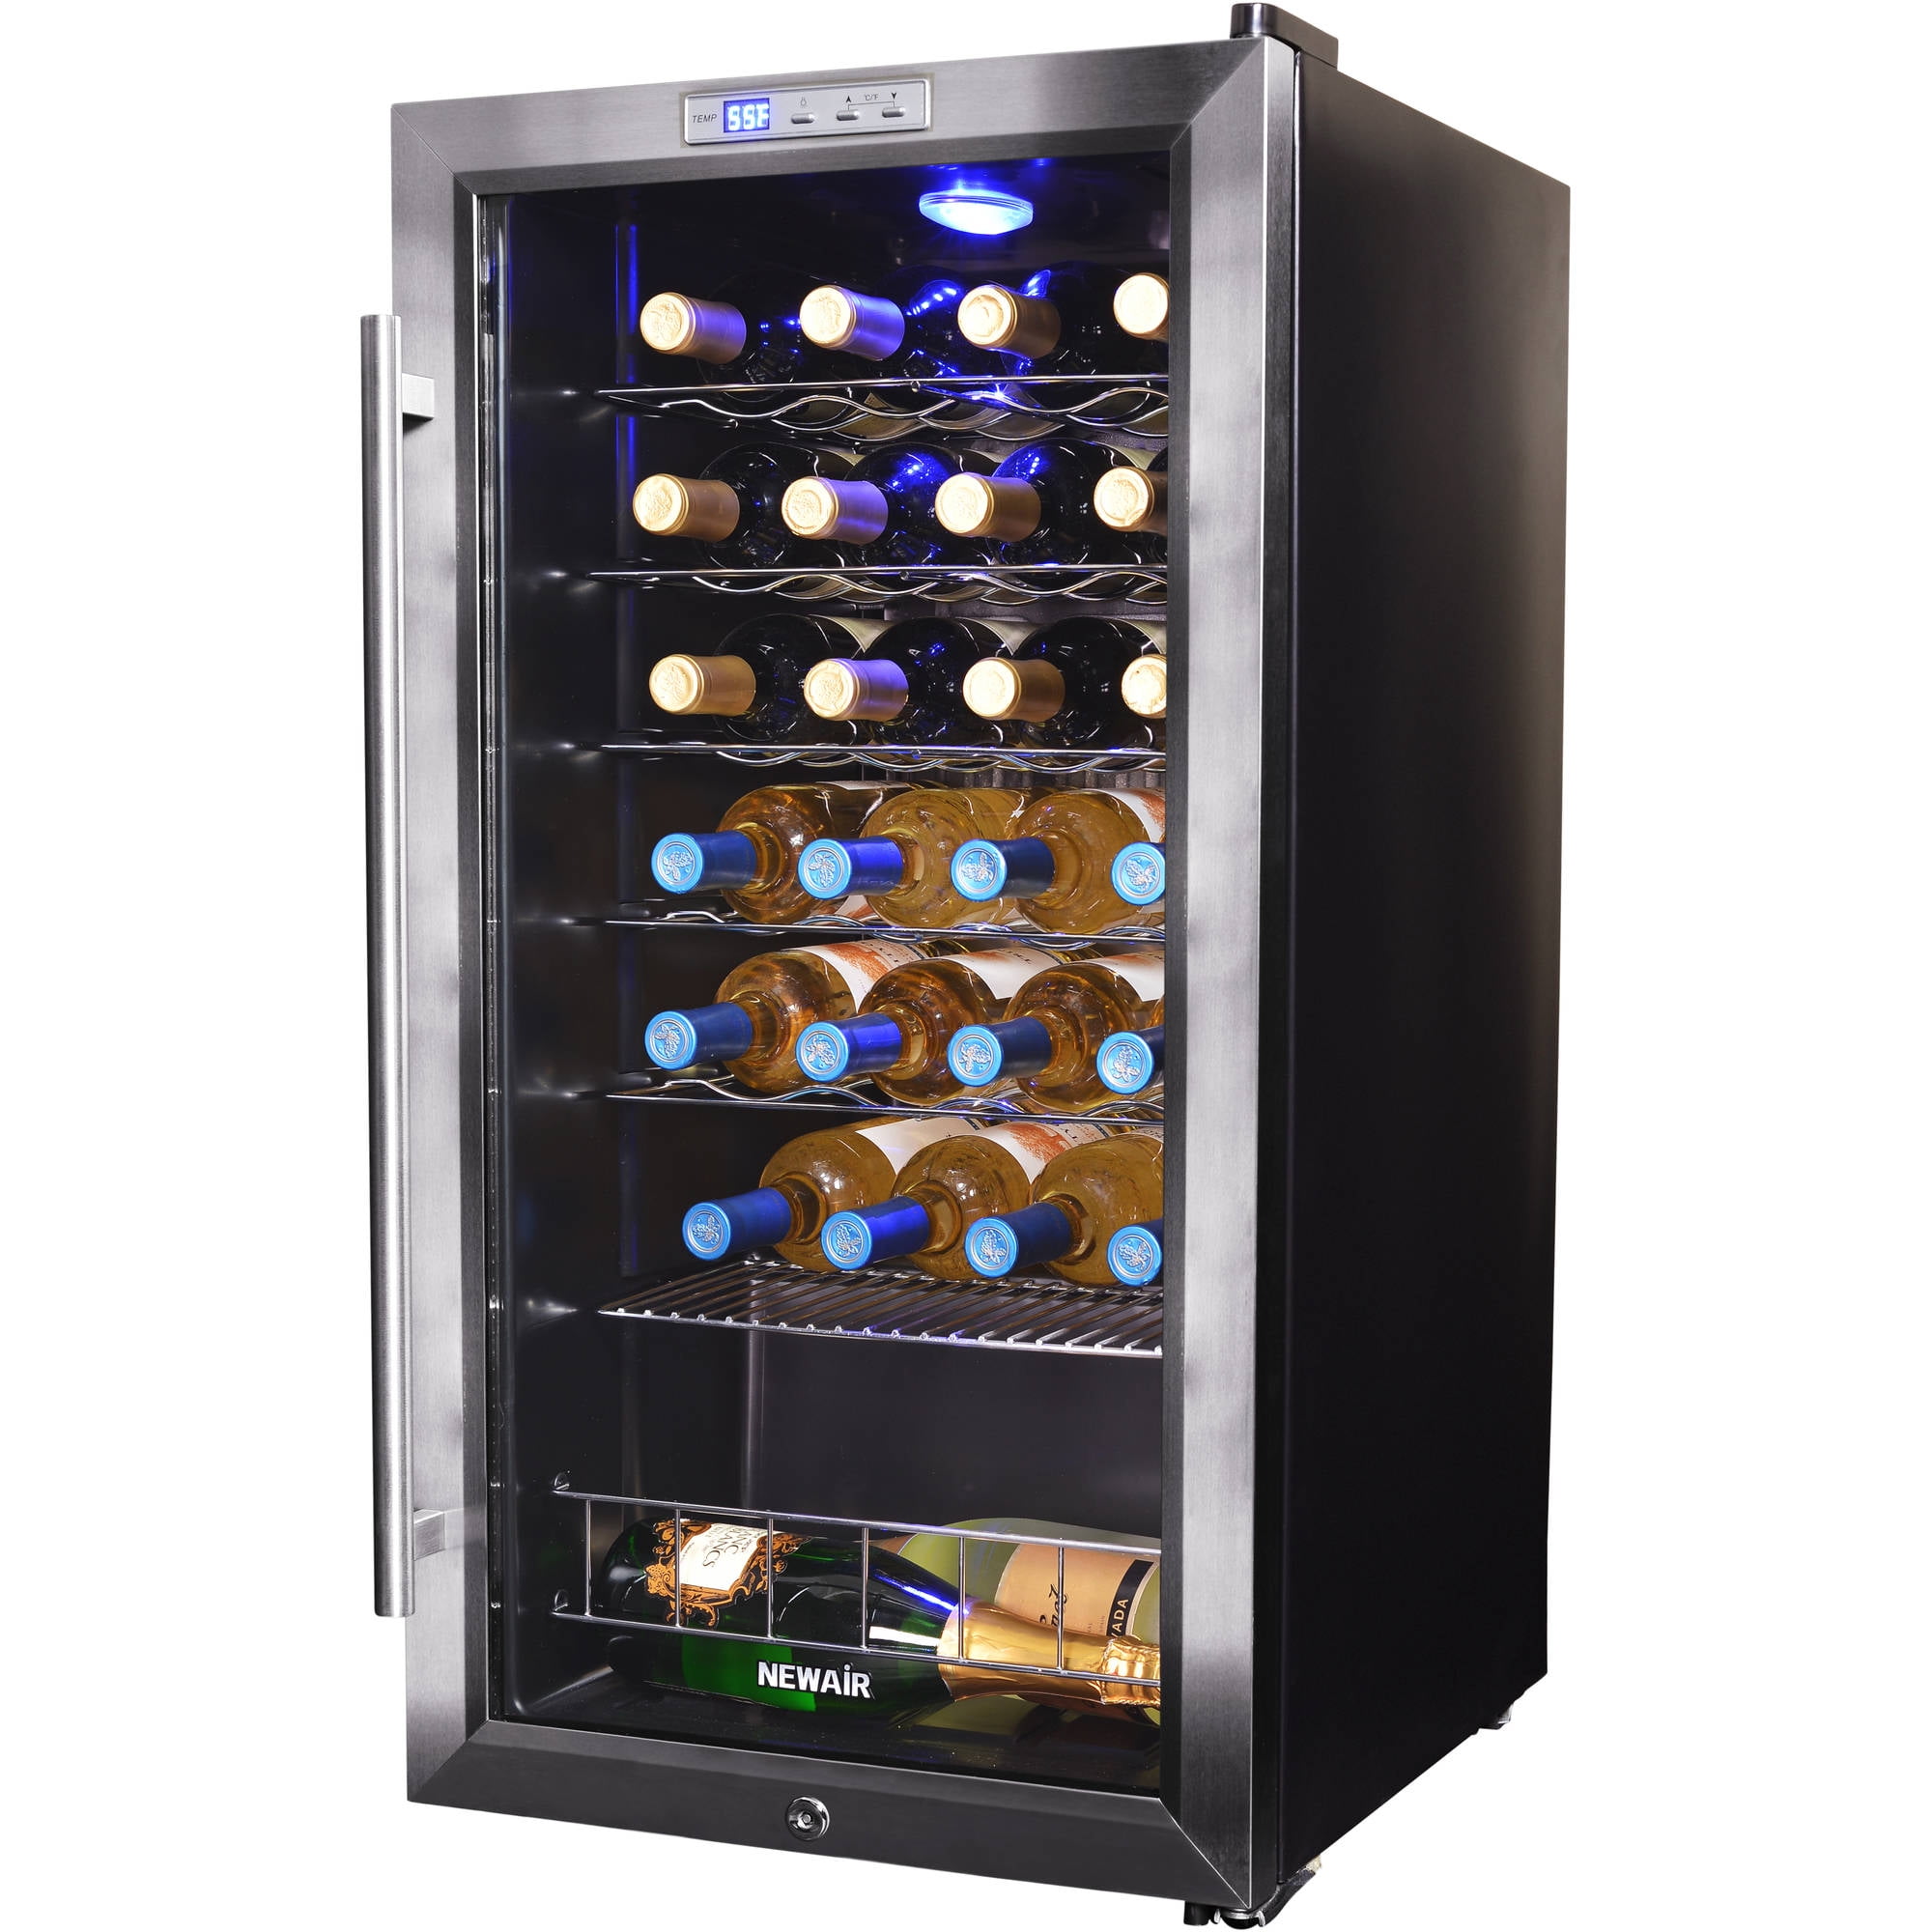 NewAir AWC 270E 27 Bottle Compressor Wine Refrigerator, Stainless Steel and Black